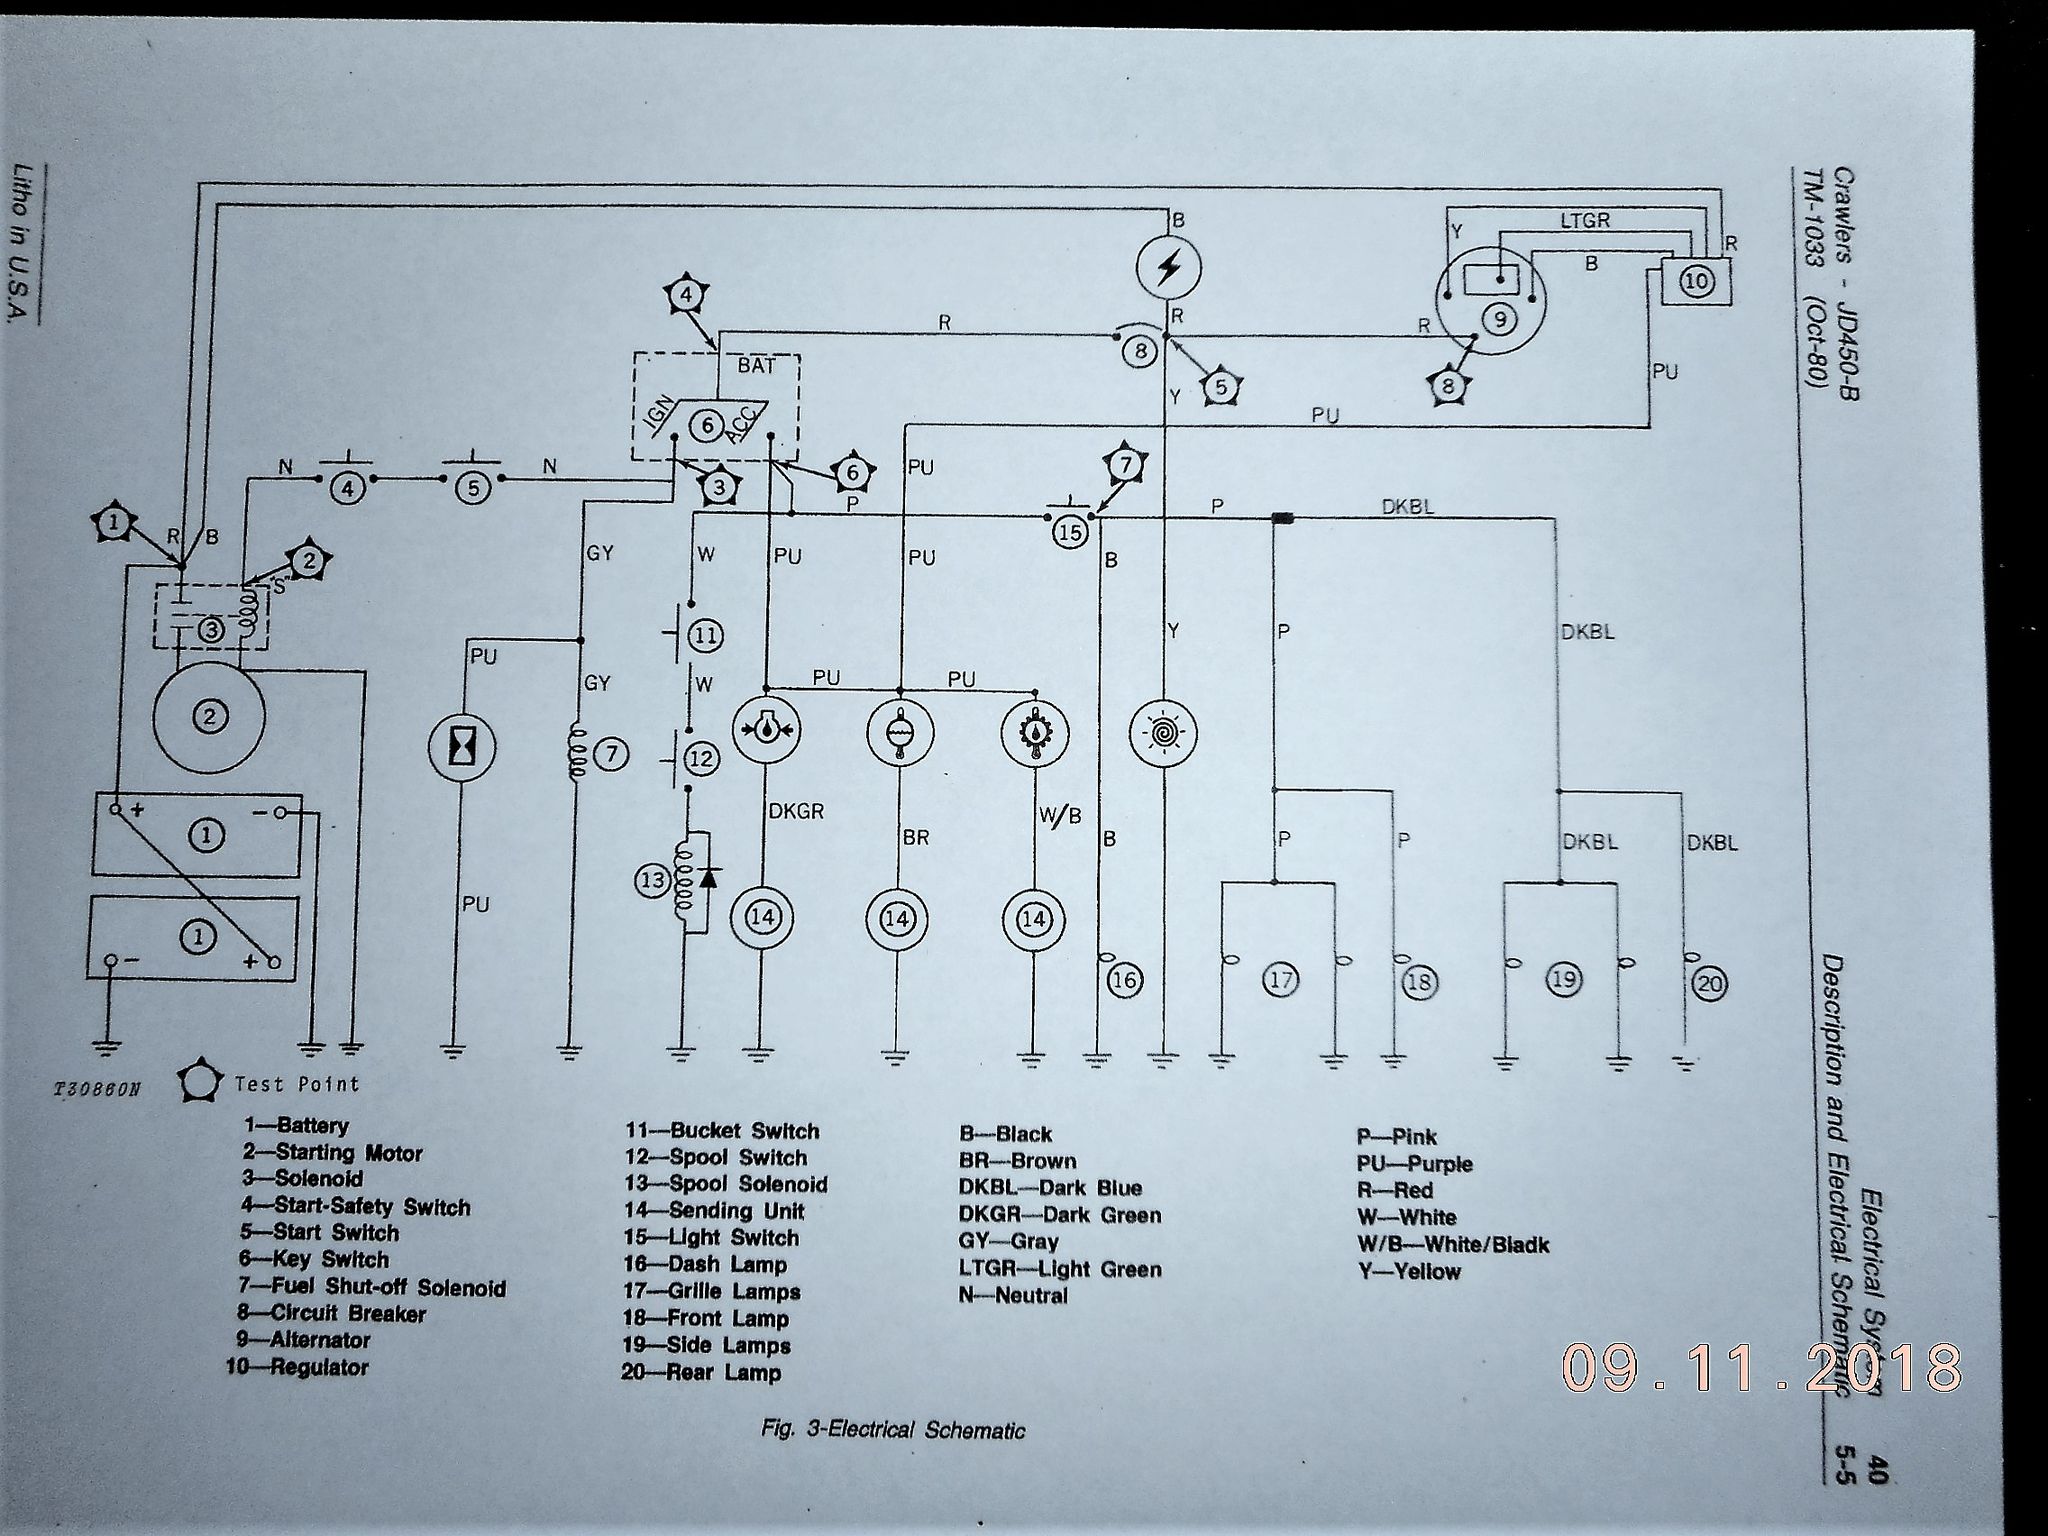 John Deere 1435 Wiring Diagram from jdcrawlers.lcent.com